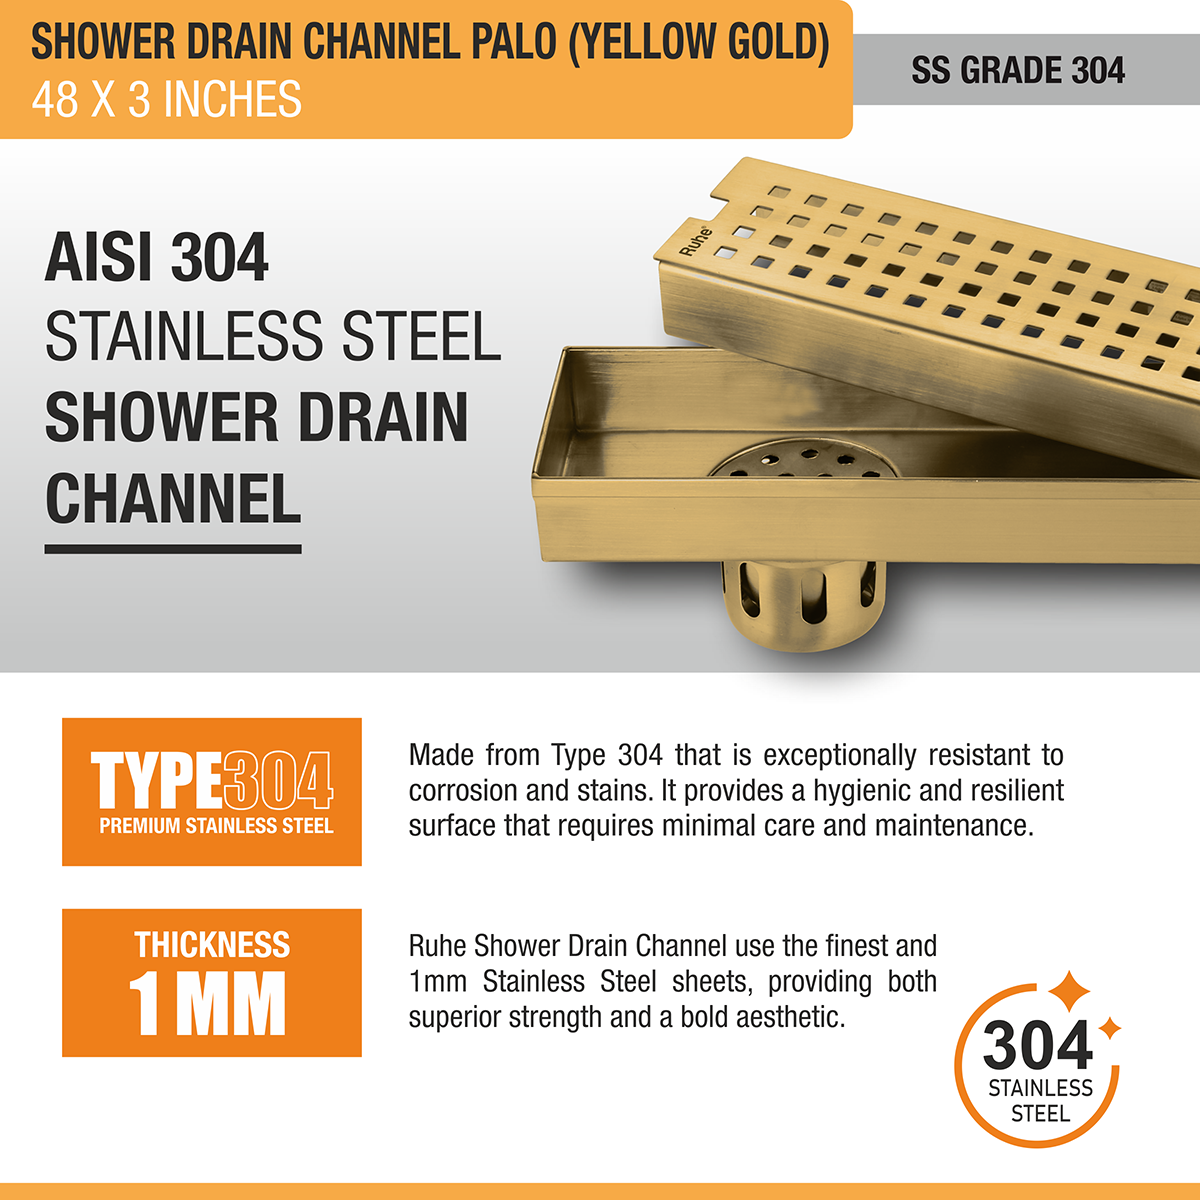 Palo Shower Drain Channel (48 x 3 Inches) YELLOW GOLD stainless steel